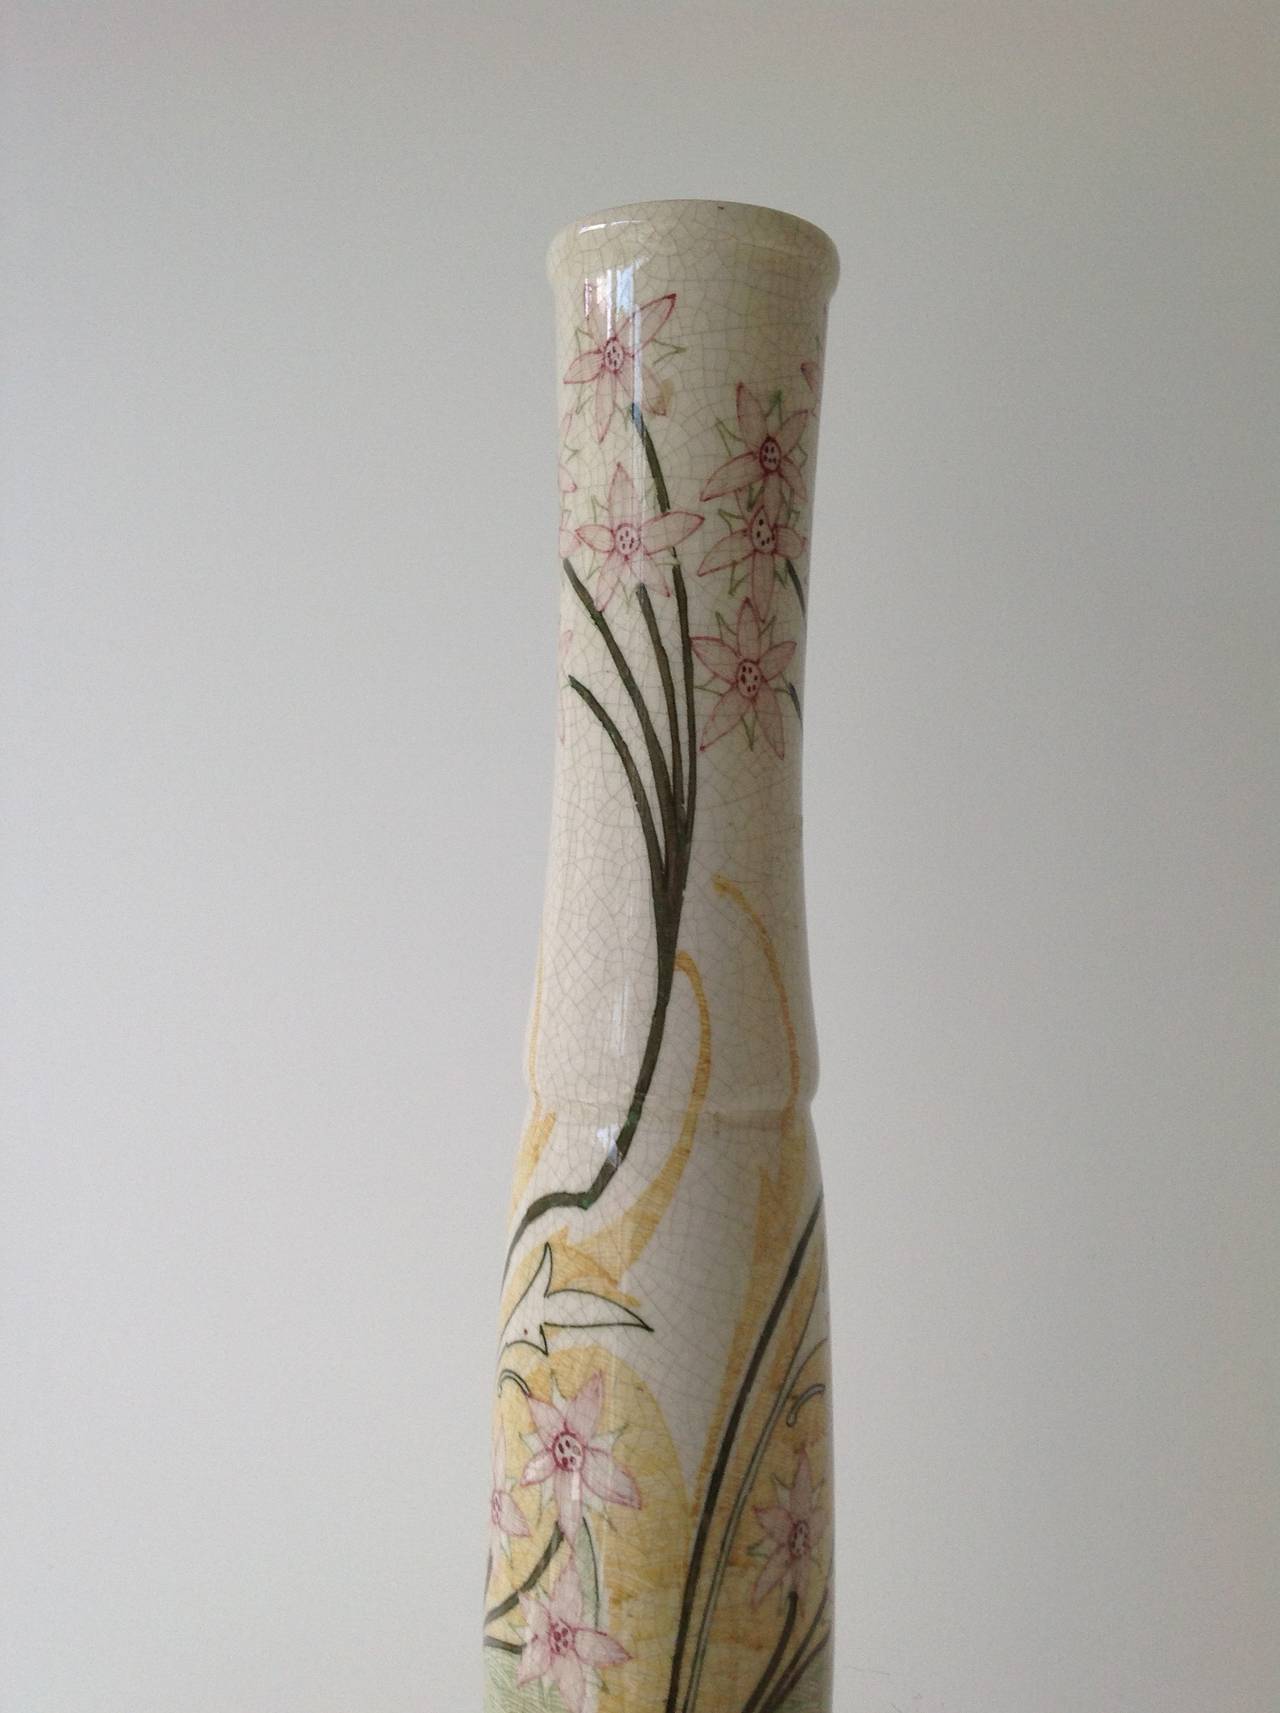 Created at the Pottery of Zuid-holland in Gouda, famous for its ceramic of the art nouveau, art deco and fifties style. This vase comes from the P collection. P for porcelain, directing to its source of inspiration: the Rozenburg eggshel porcelain.